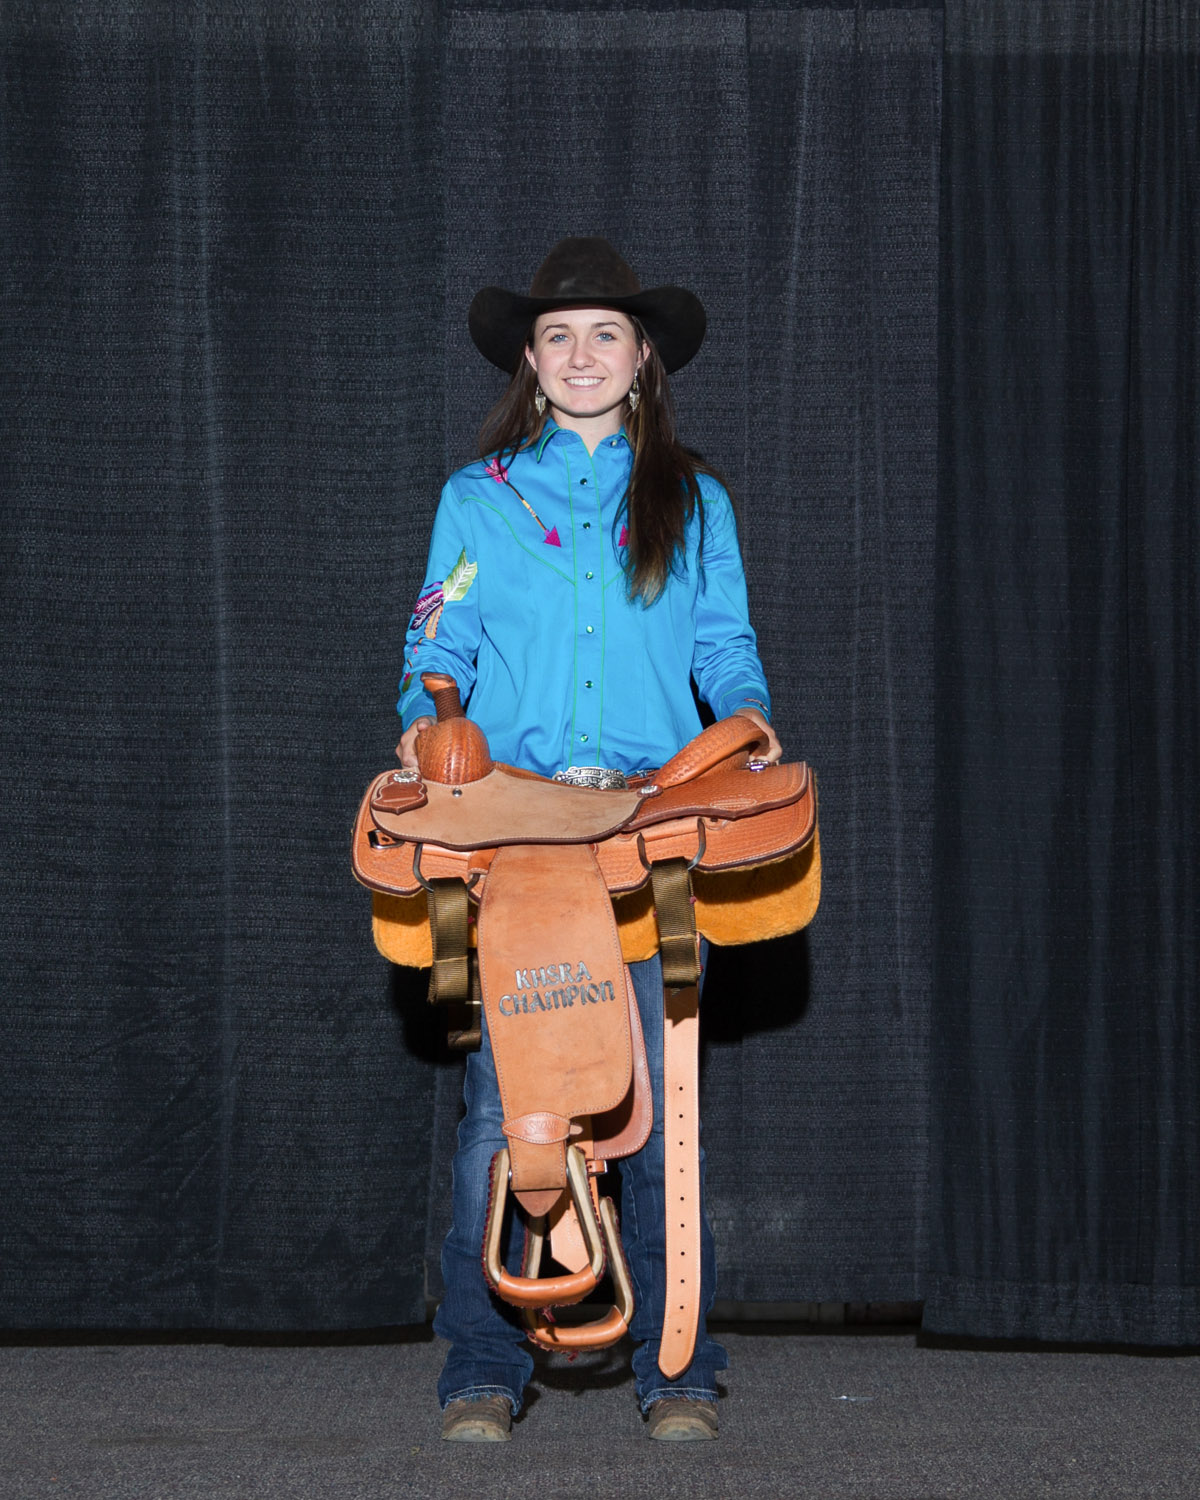 All-around cowgirl title was awarded to Paige Wiseman, Paola, at the conclusion of the Kansas High School Rodeo Finals in Topeka. She was the yearend champion in breakaway roping and girls cutting as well as ranking in the top four in both goat tying and pole bending, qualifying to complete in all four events at the National High School Rodeo Finals, July 13-19, in Rock Springs, Wyoming (Photo courtesy Kent Kerschner, www.fotocowboy.com, kent@fotocowboy.com.)